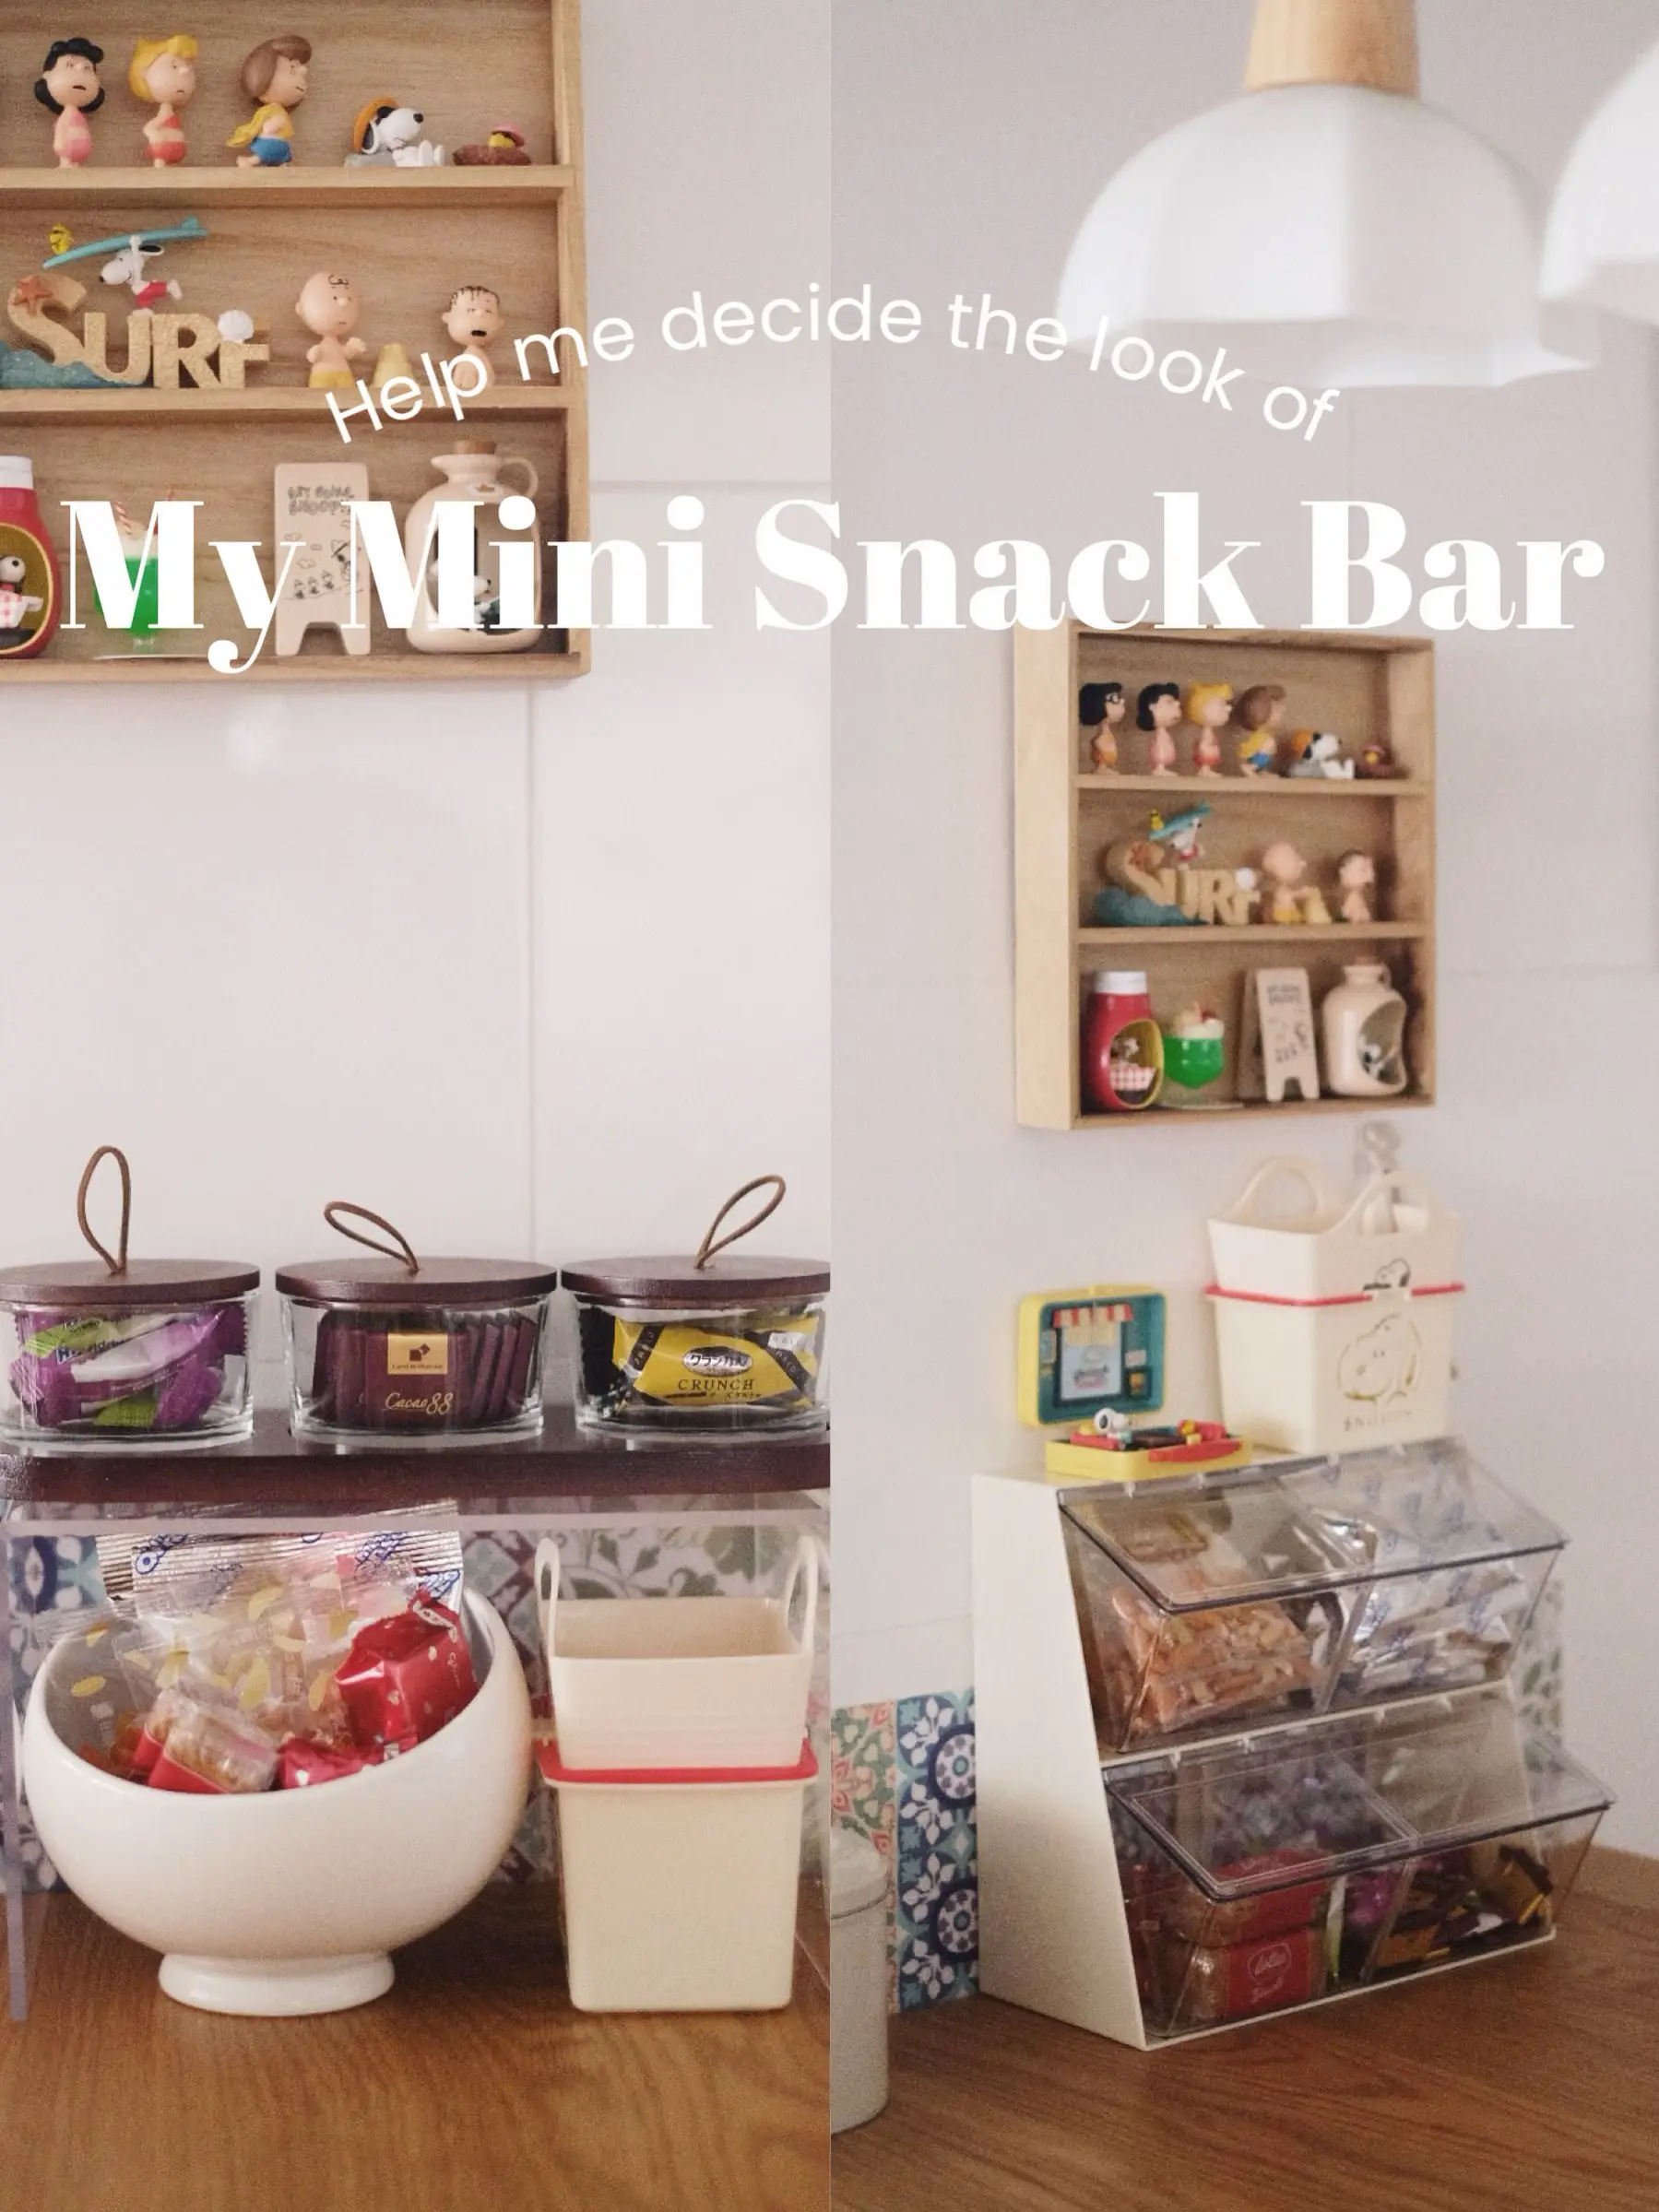 Help me CHOOSE! My Mini Snack Bar!, Gallery posted by Nat